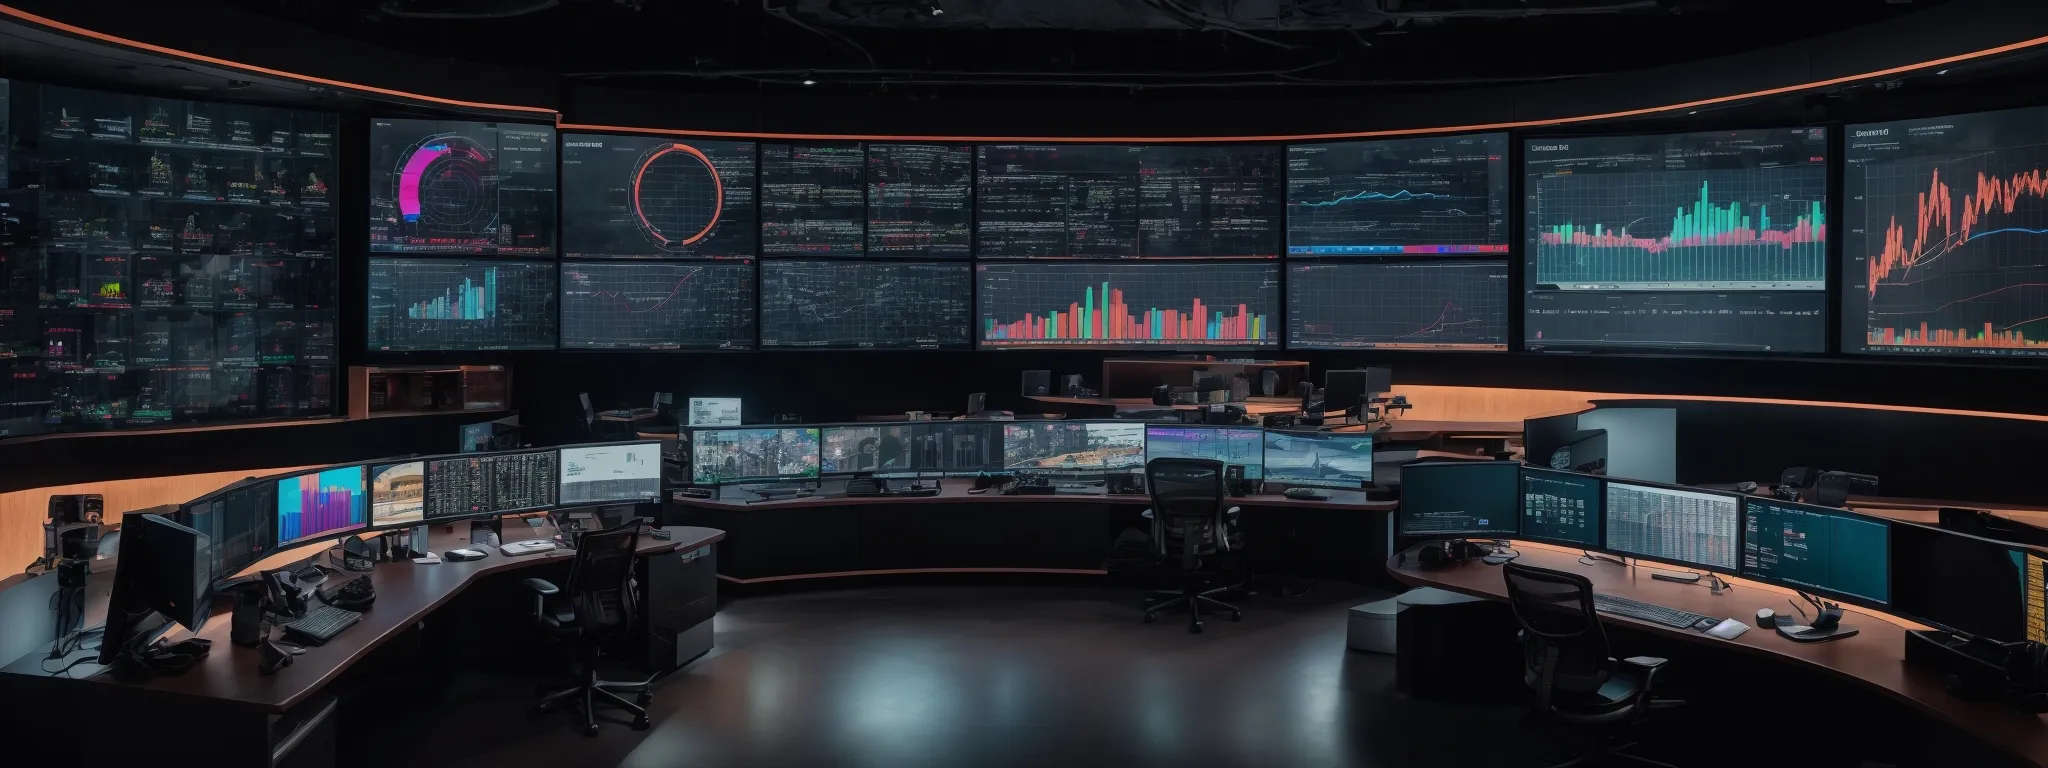 a panoramic view of a sleek command center with multiple screens displaying colorful analytics charts and a large central display highlighting real-time seo metrics.